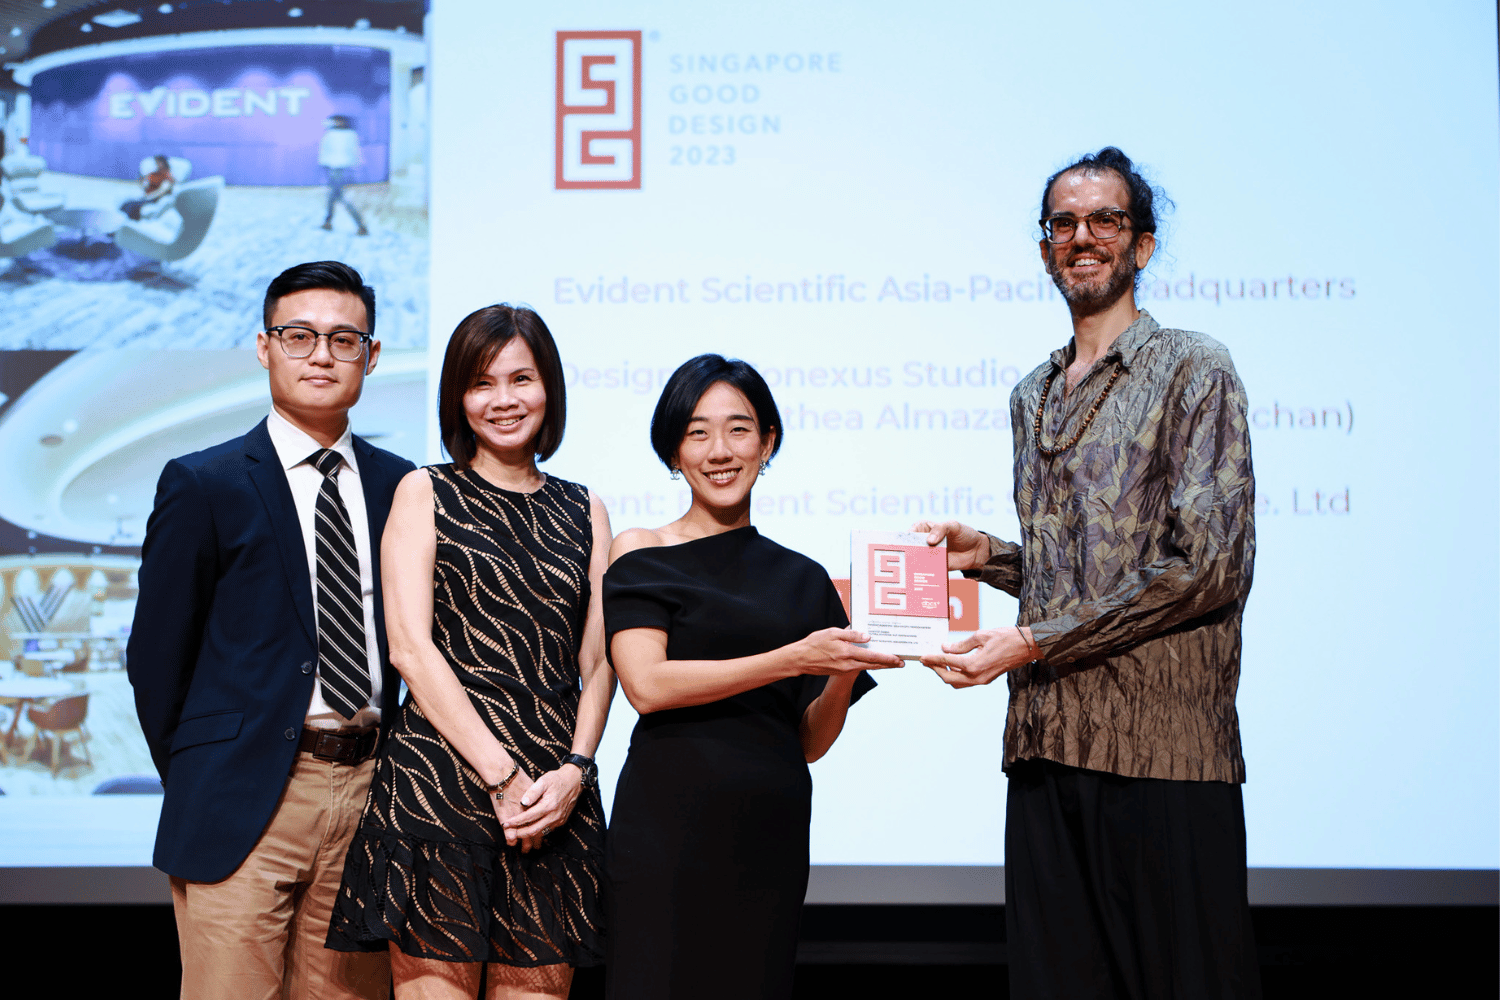  Representing the team for the Evident Asia Pacific office design award win: (from left): Manager, APAC Administrative Business Partner, Jacelyn Koh, Brand &amp; Creative Lead, APAC, Jonathan Ha &amp; Associate Design Director Nat Jentraichan. 